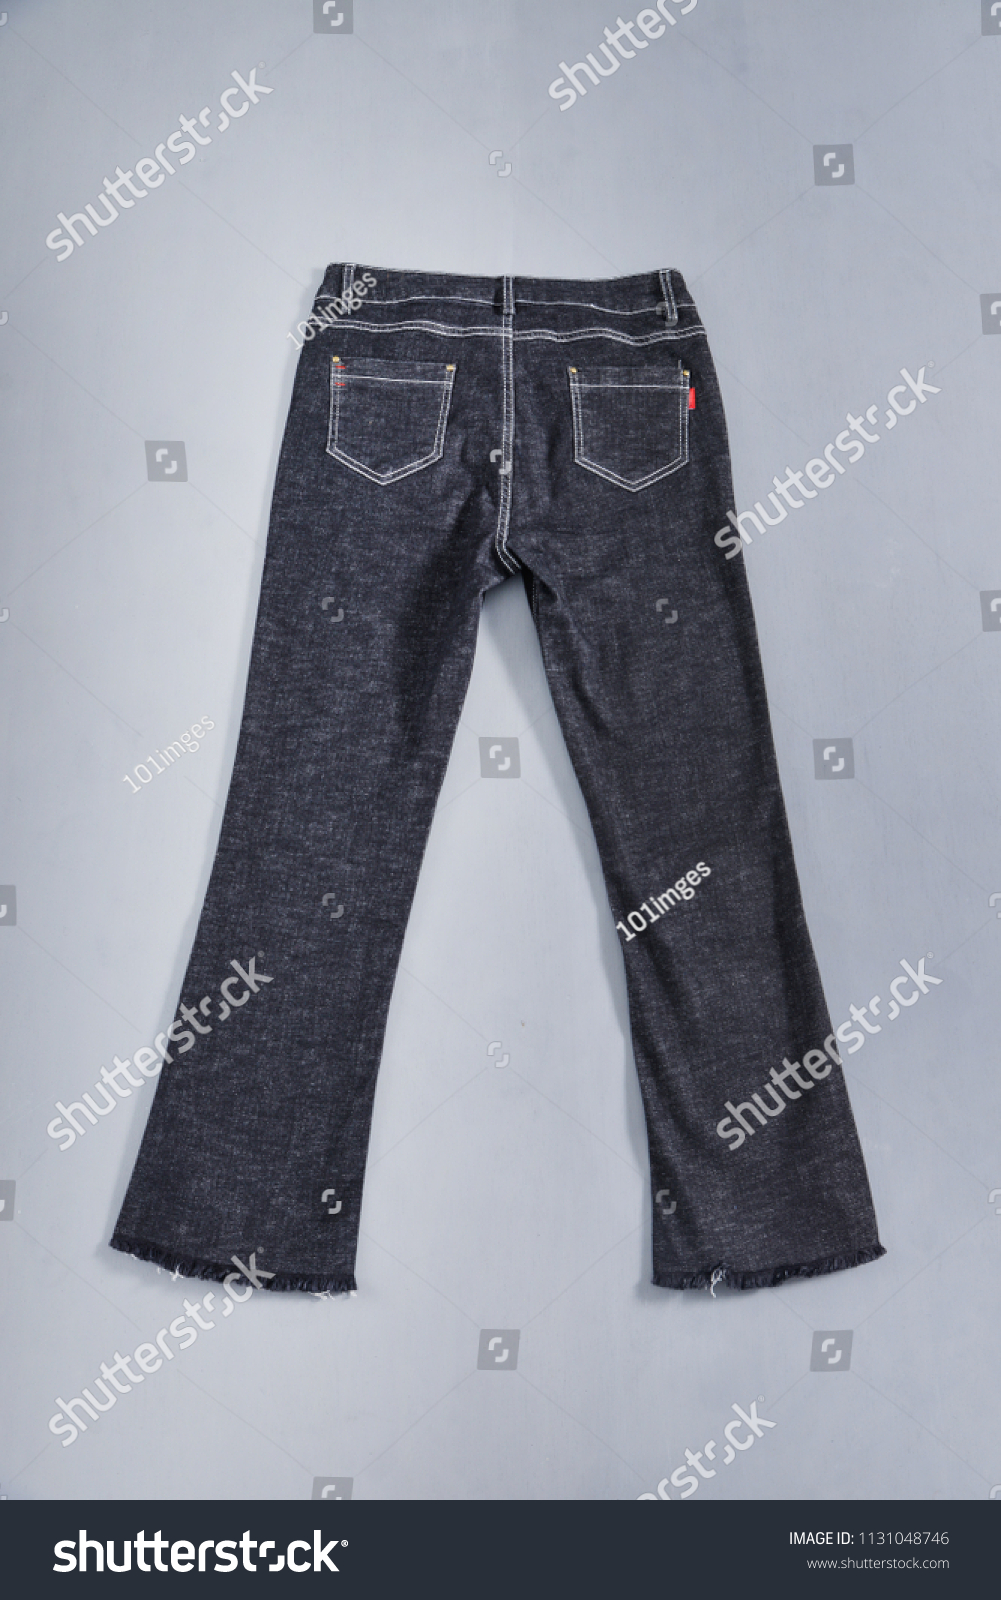 Back View Jeans Trousergray Background Stock Photo 1131048746 ...